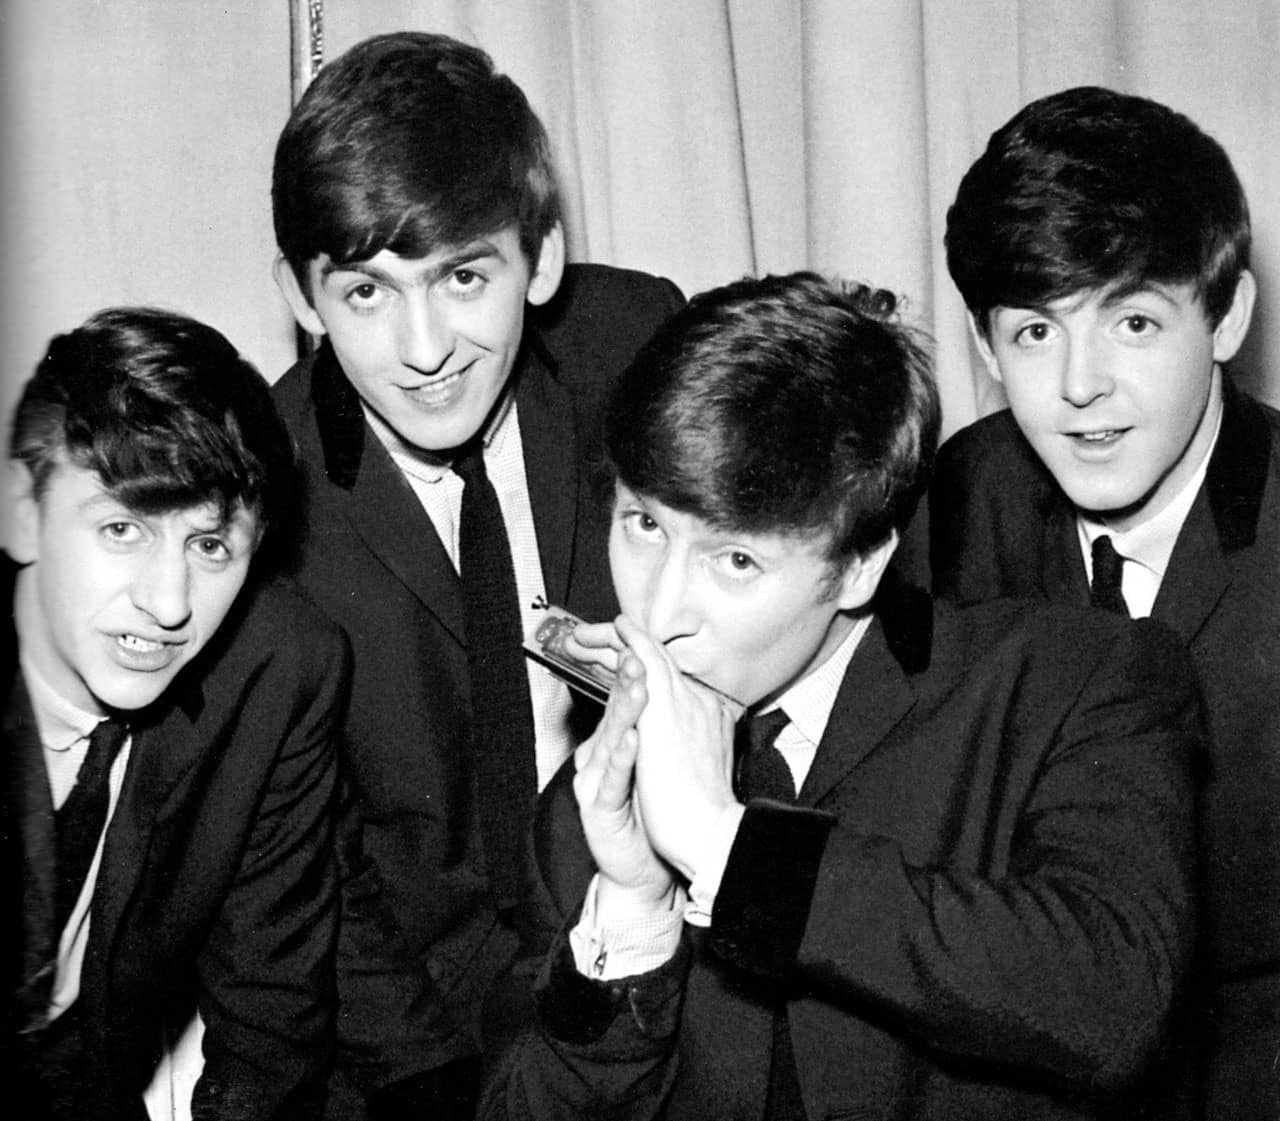 The Beatles in London, 9 March 1963 | The Beatles Bible